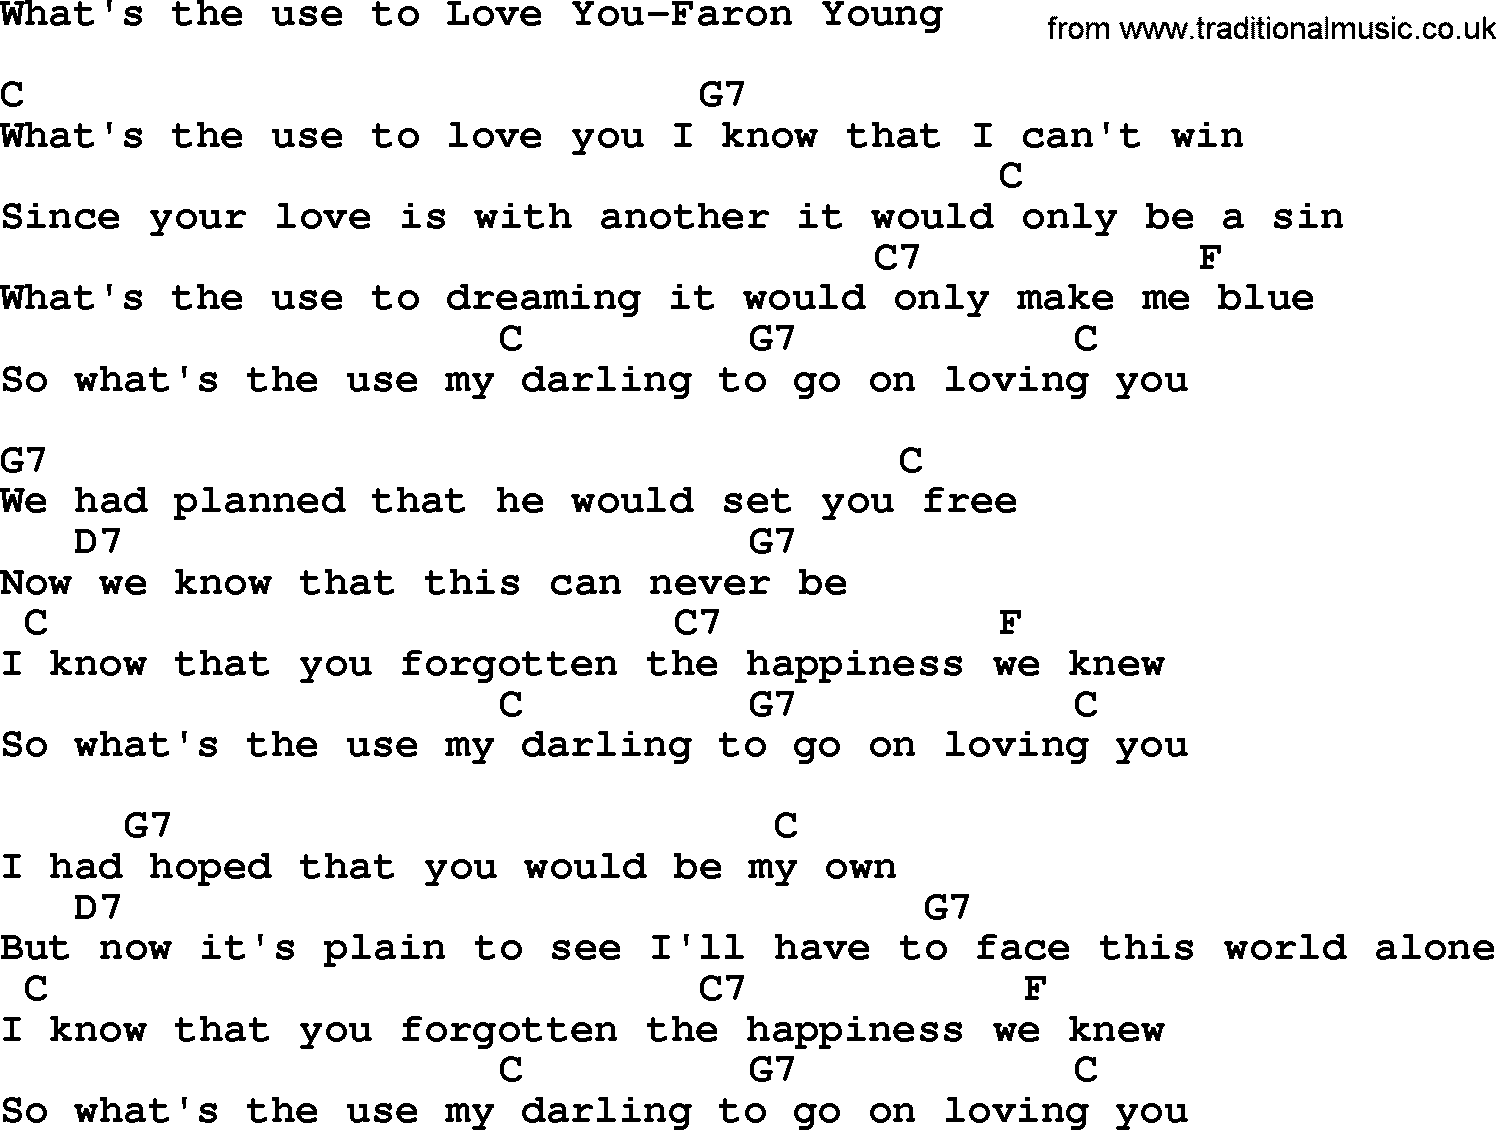 Country music song: What's The Use To Love You-Faron Young lyrics and chords